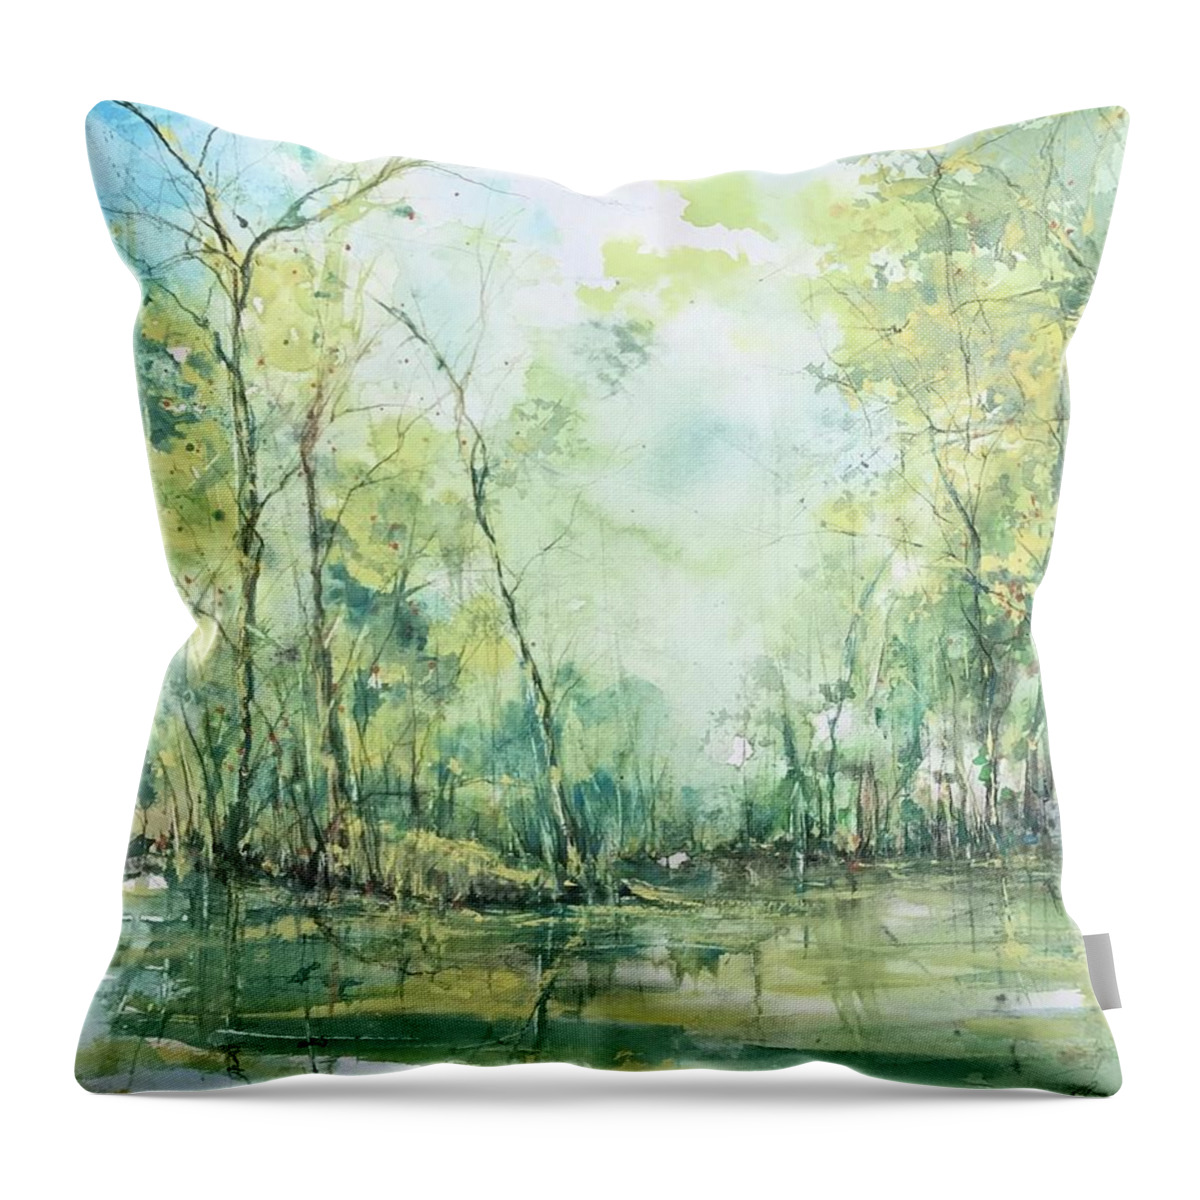 September Throw Pillow featuring the painting September Silence by Robin Miller-Bookhout